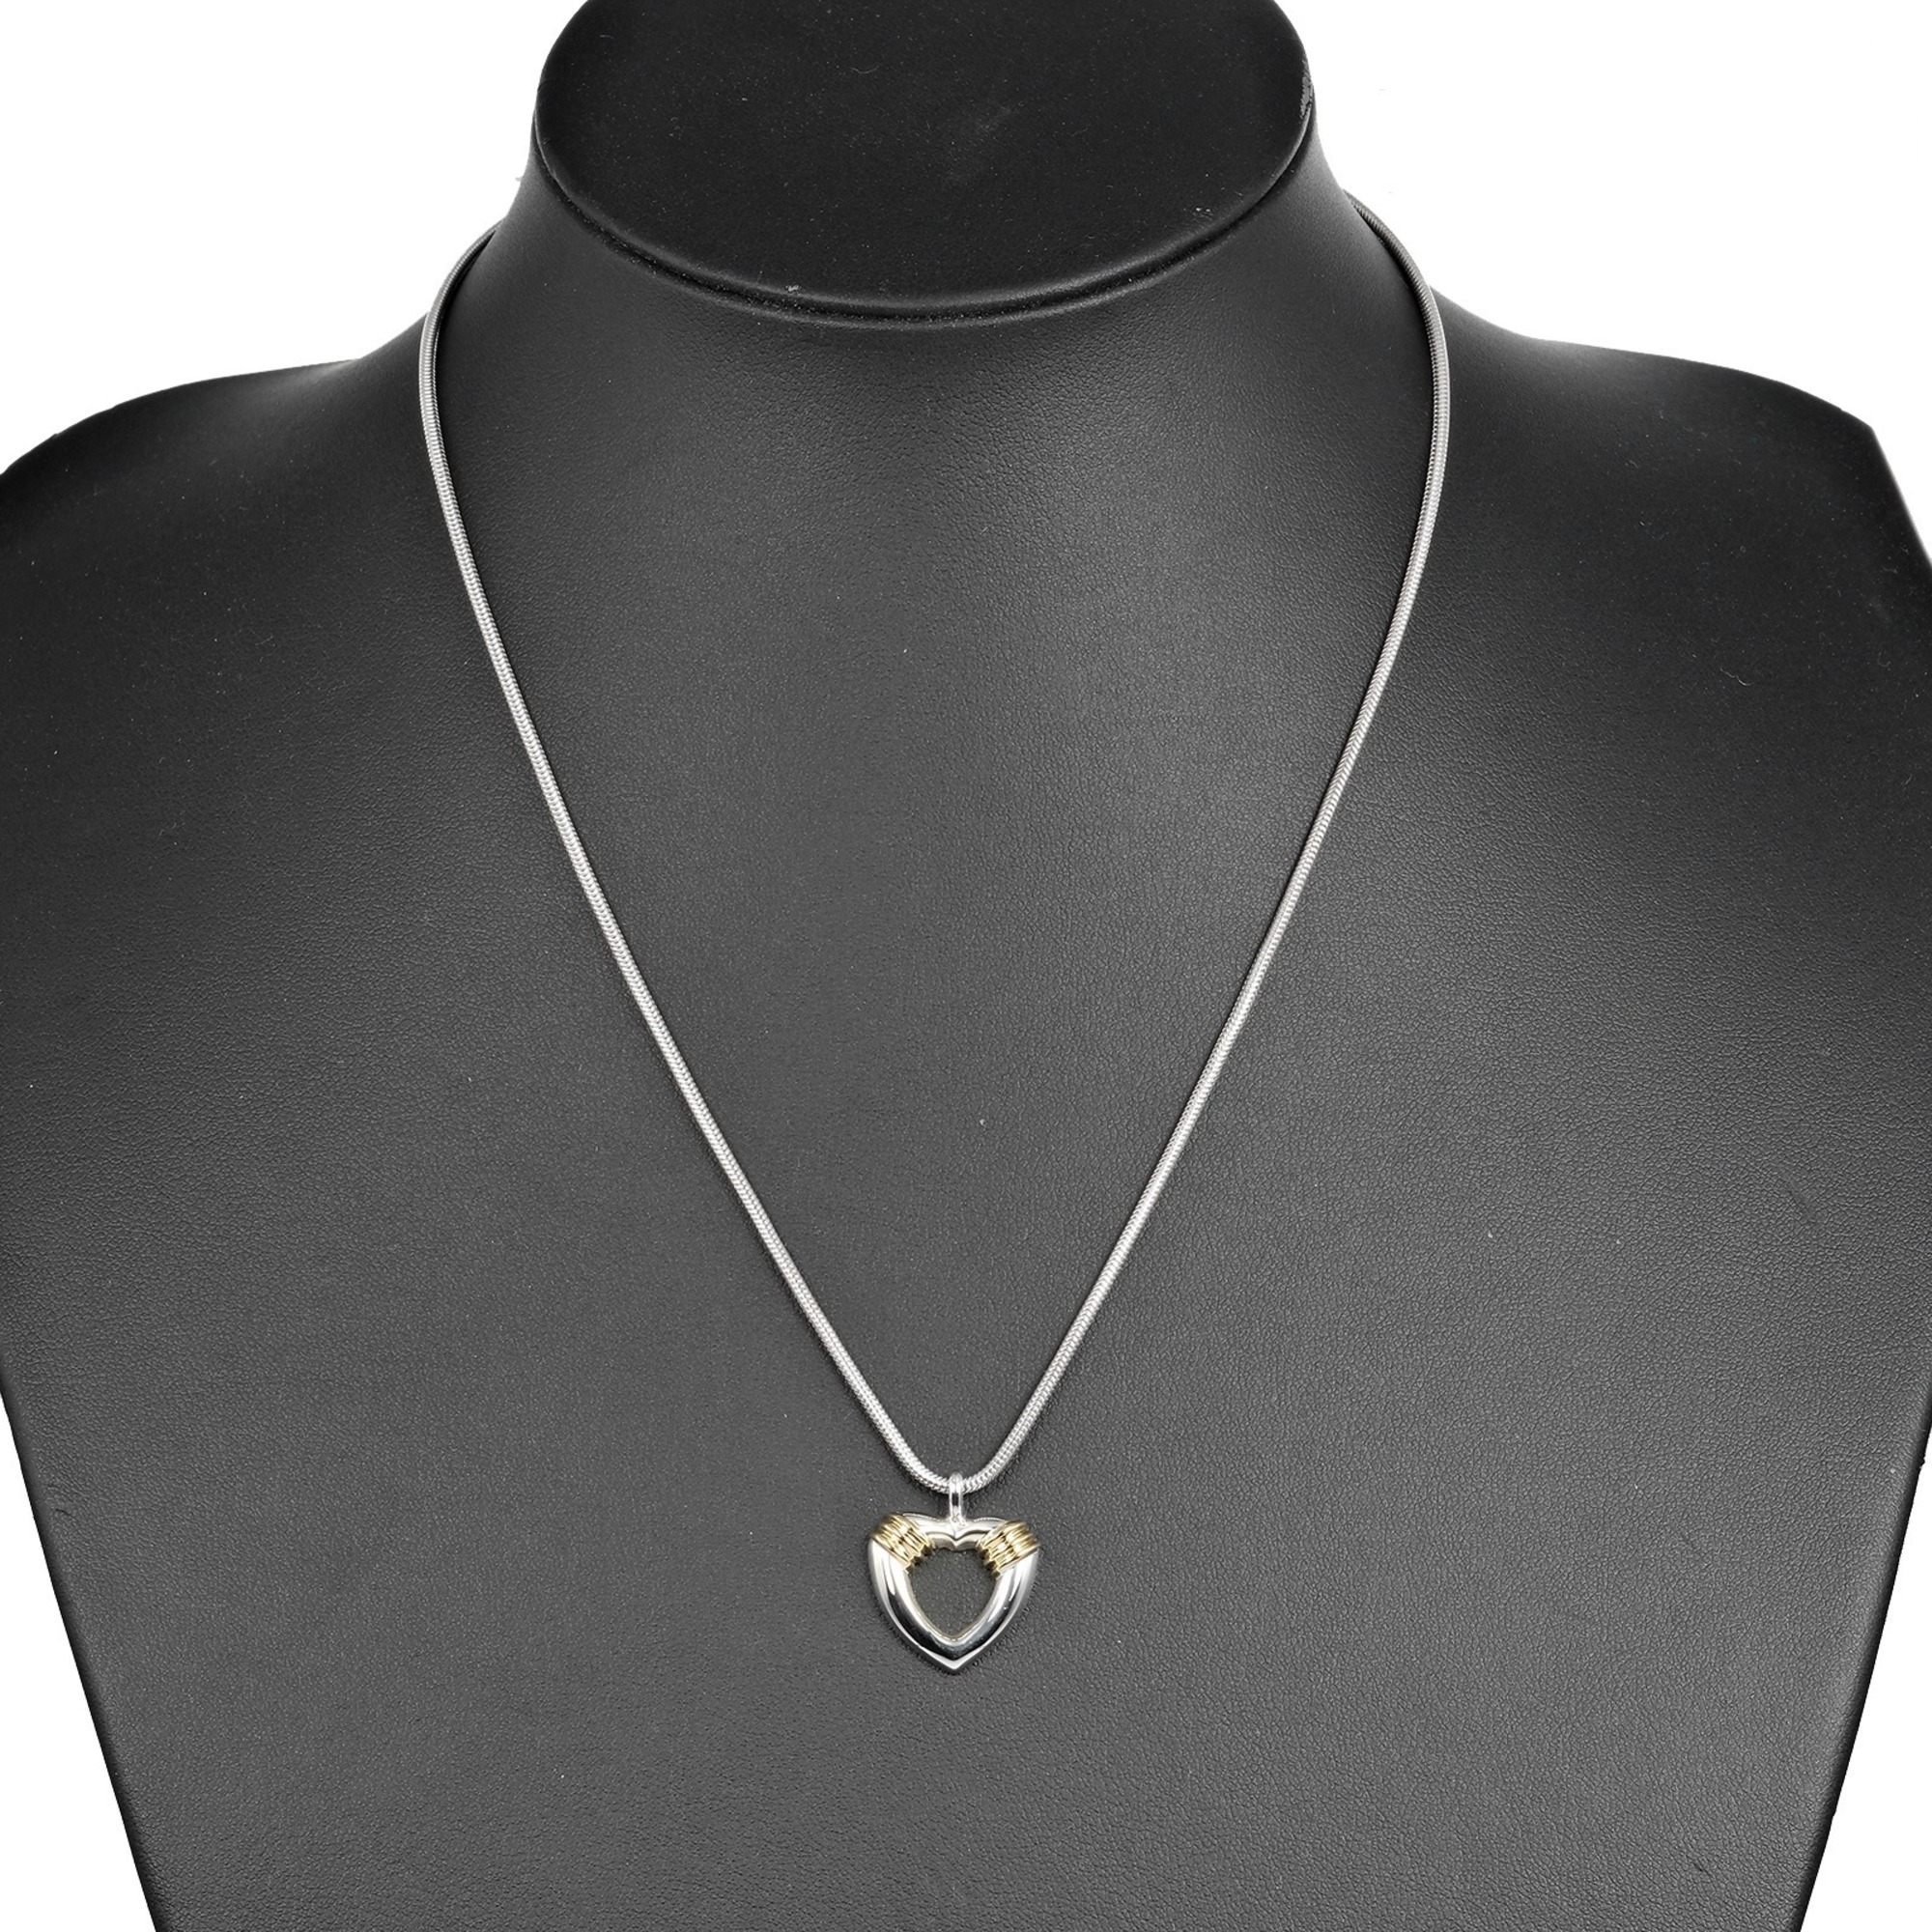 Tiffany & Co. Heart Necklace Snake Chain Silver 925 K18 Gold Approx. 10.82g